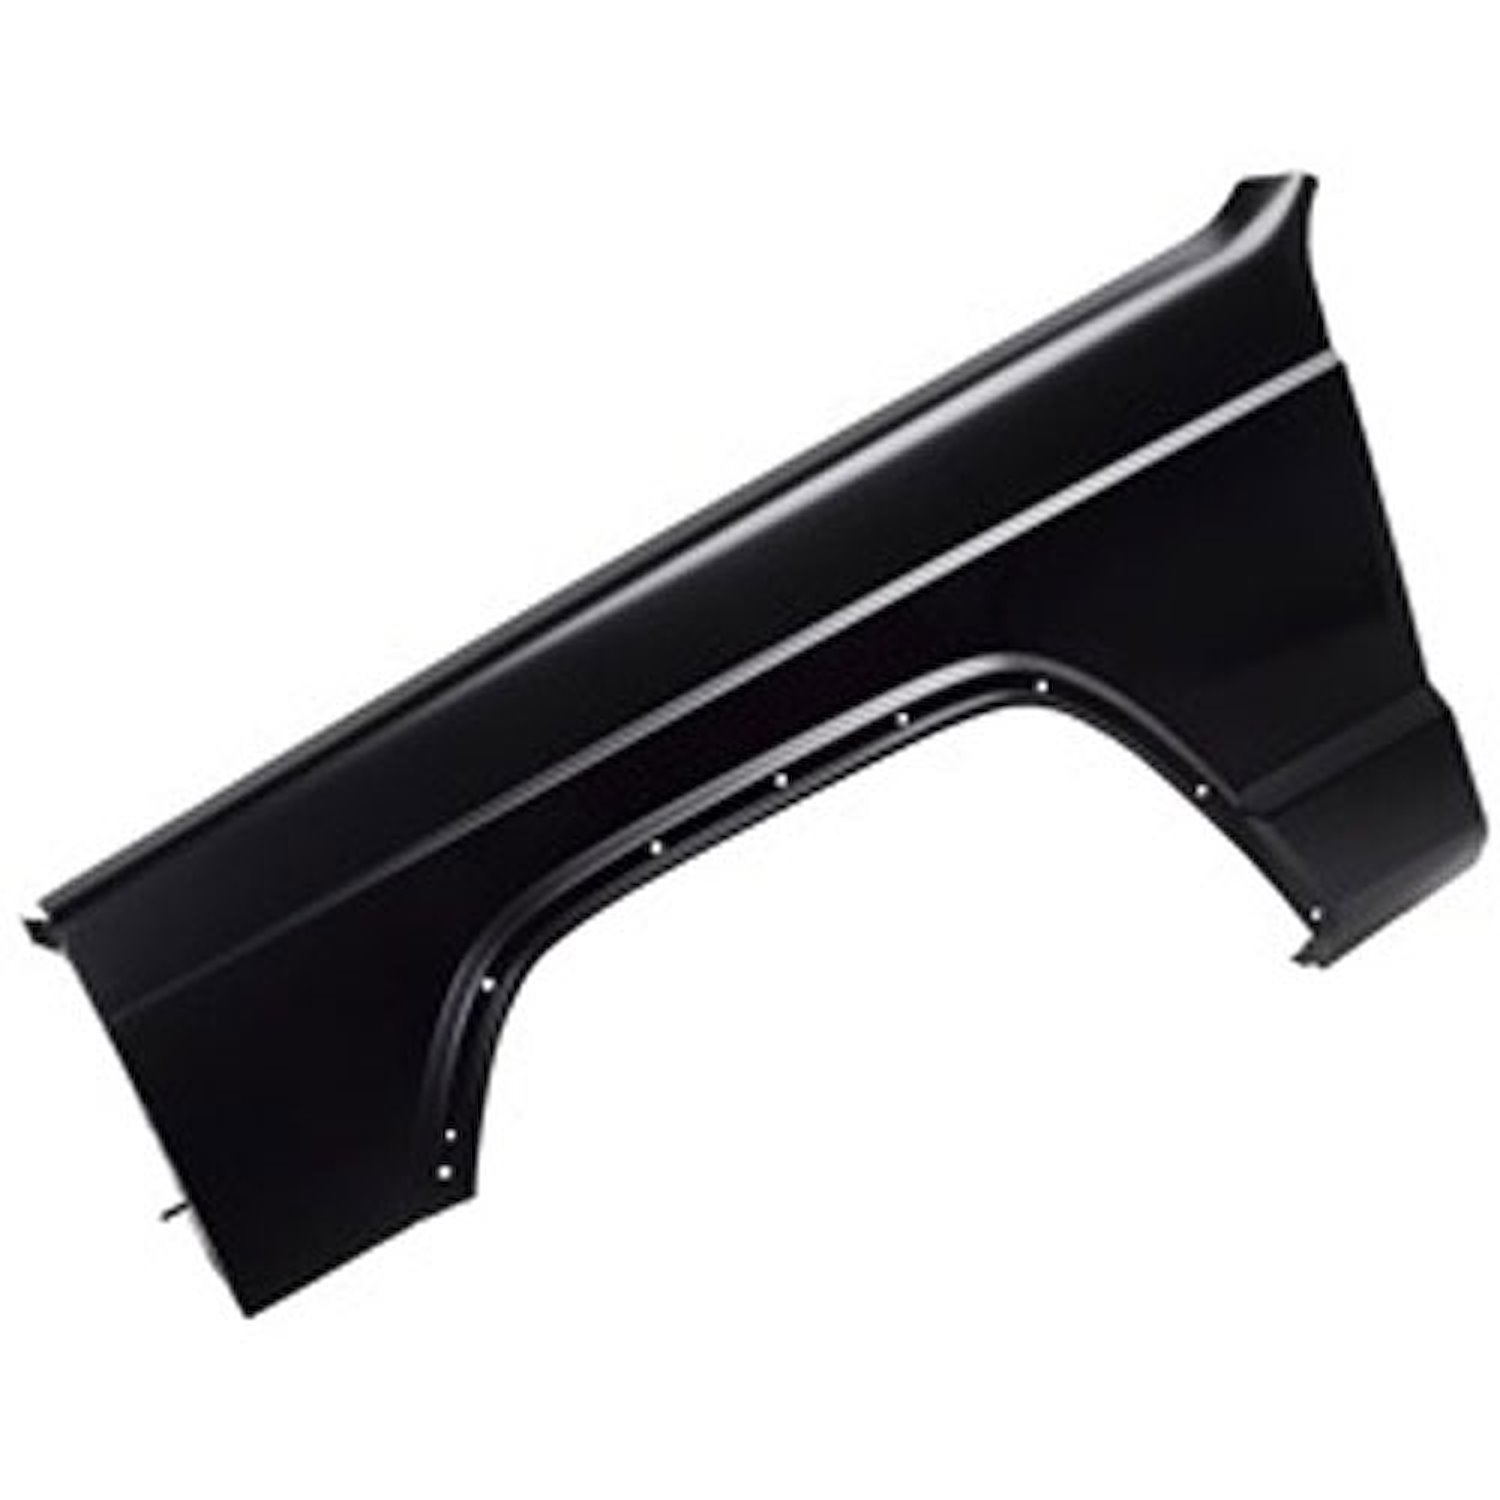 Replacement front fender from Omix-ADA, Fits left side on 97-01 Jeep Cherokee XJ